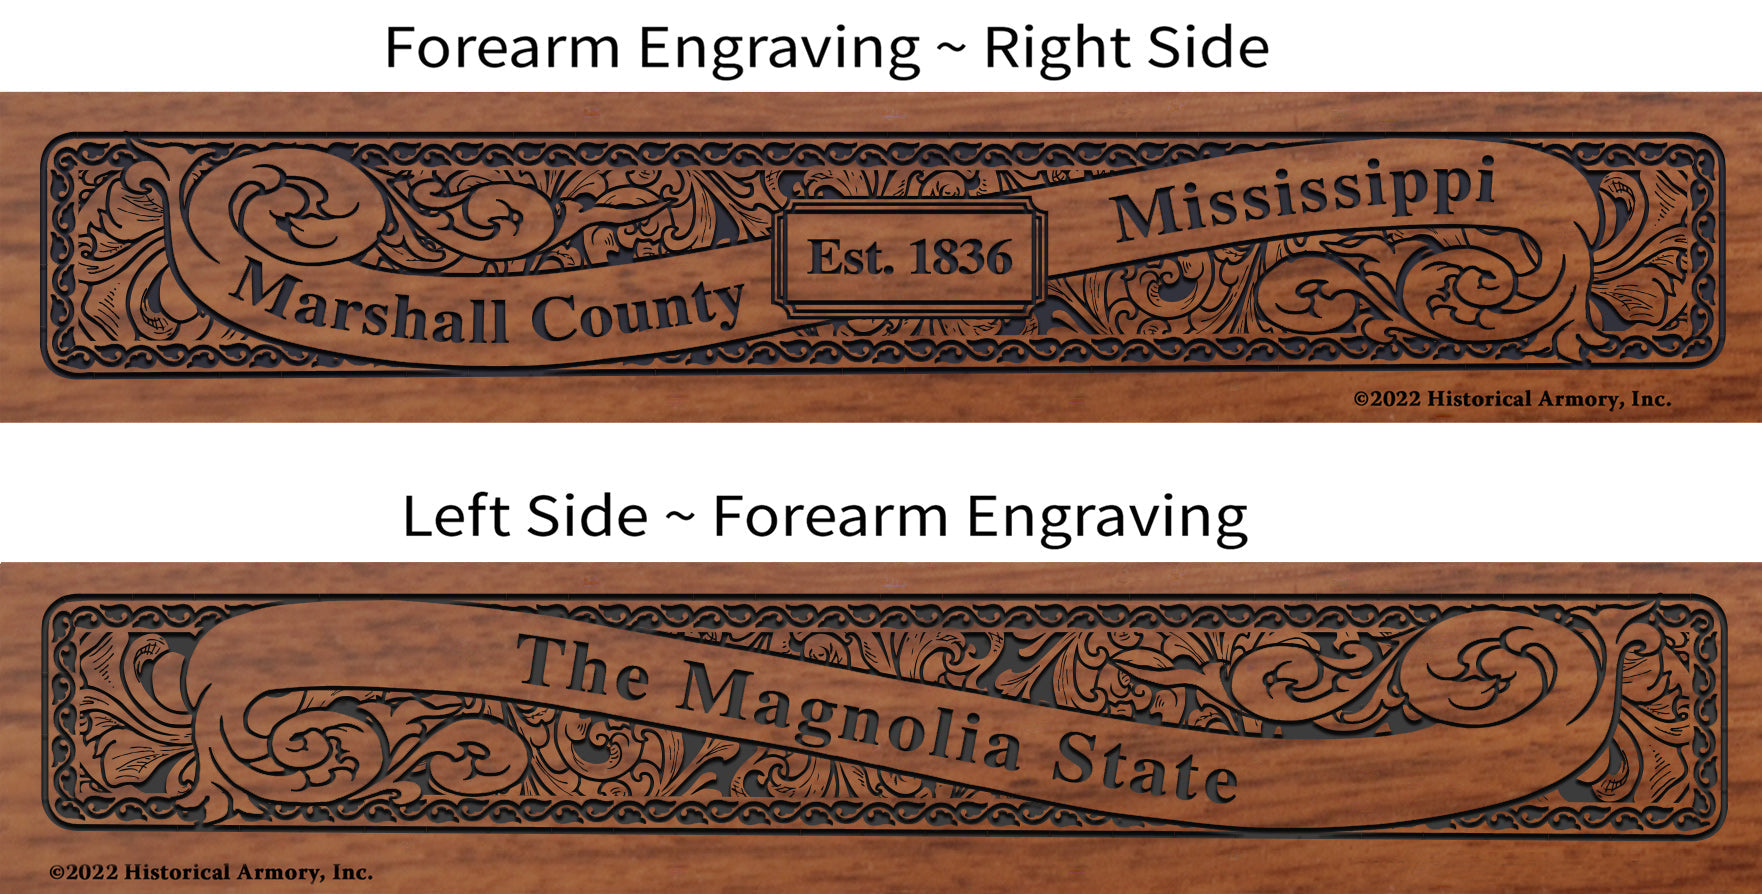 Marshall County Mississippi Engraved Rifle Forearm